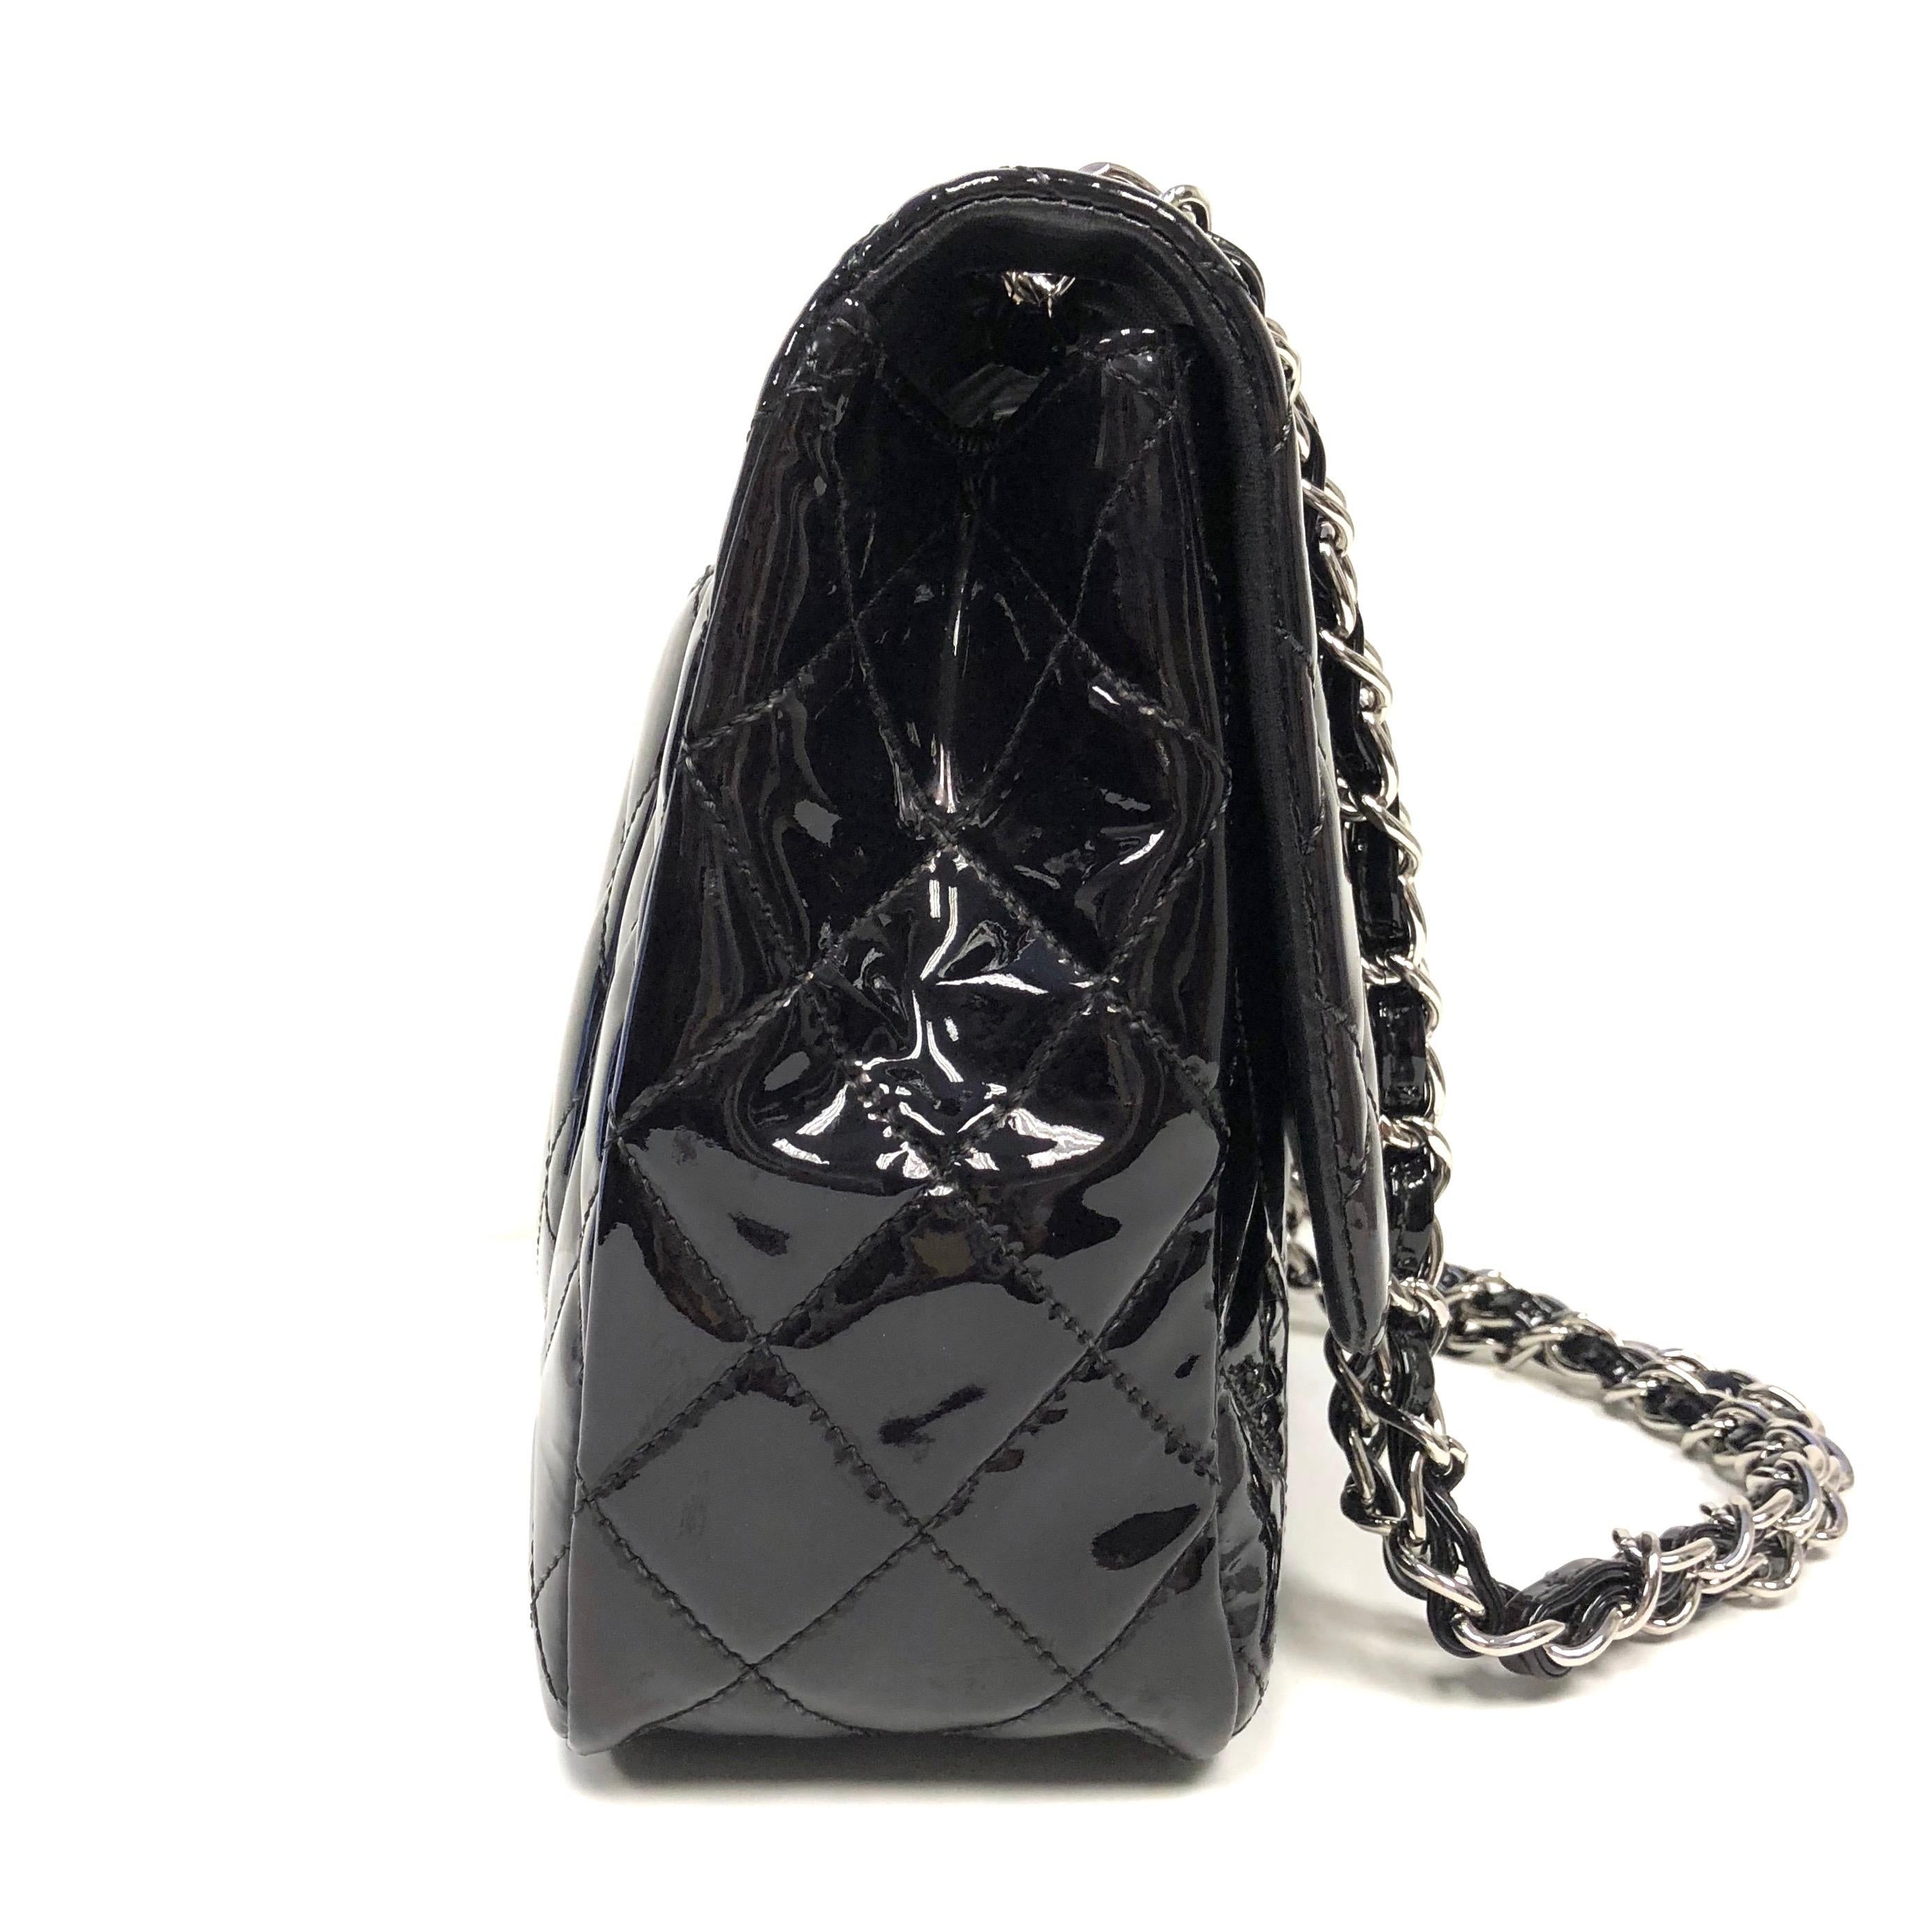 Chanel Classic single flap bag, crafted of fine diamond quilted glossy patent leather in black. The bag features patent leather threaded silver chain shoulder straps and a facing half flap with a silver Chanel CC turn lock. The interior features